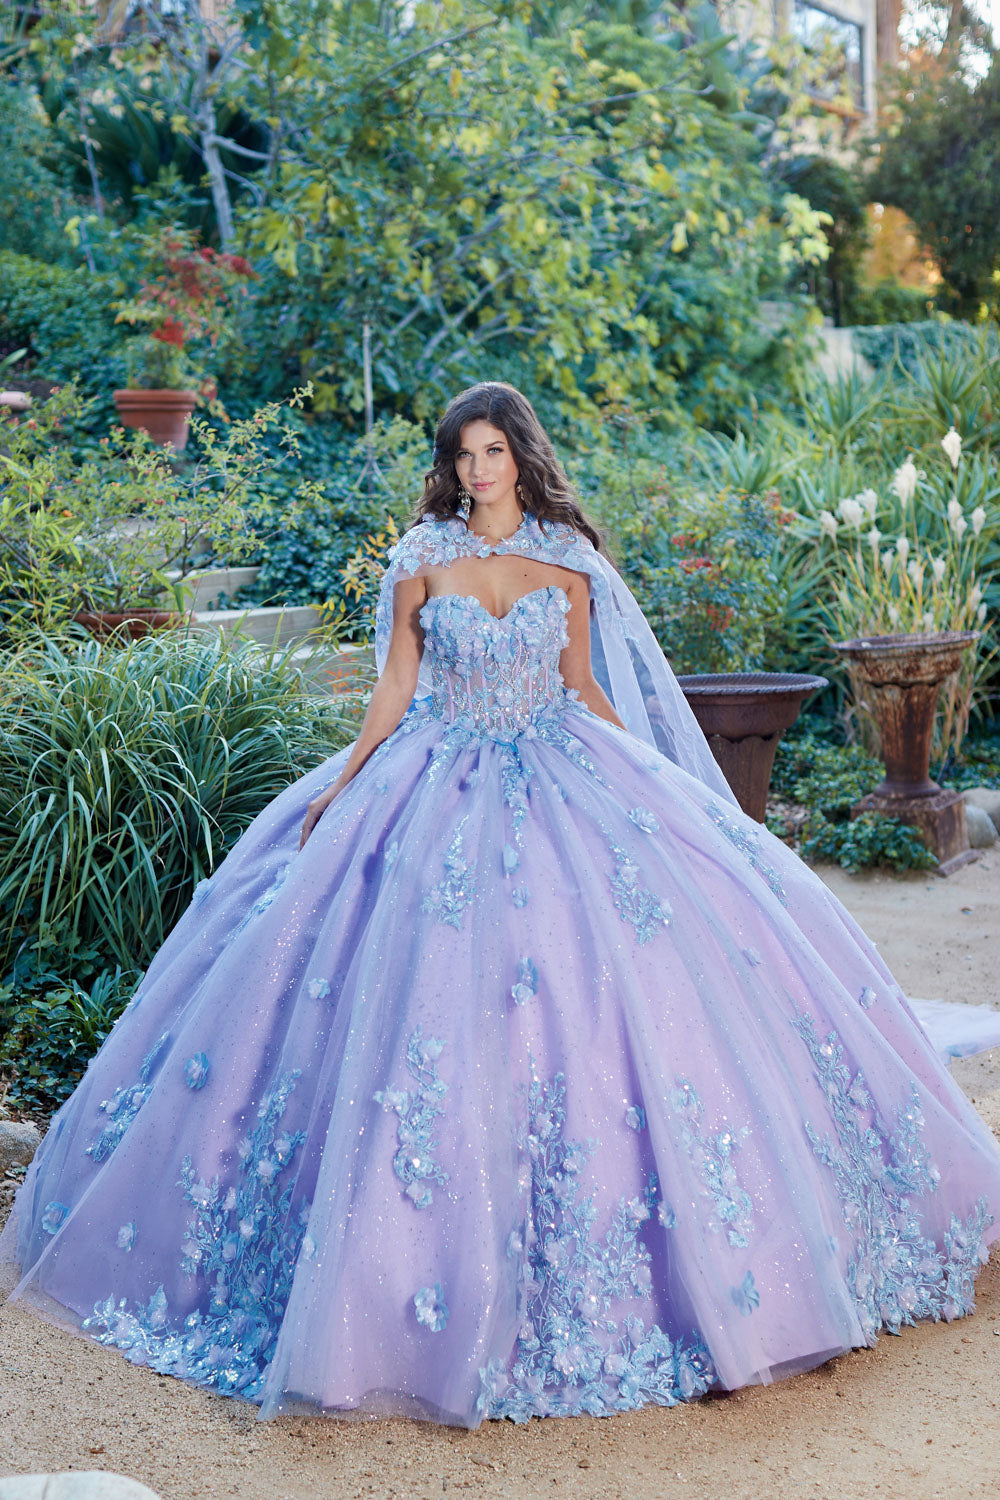 Two-Tone Strapless Cape Ball Gown by Petite Adele PQ1040